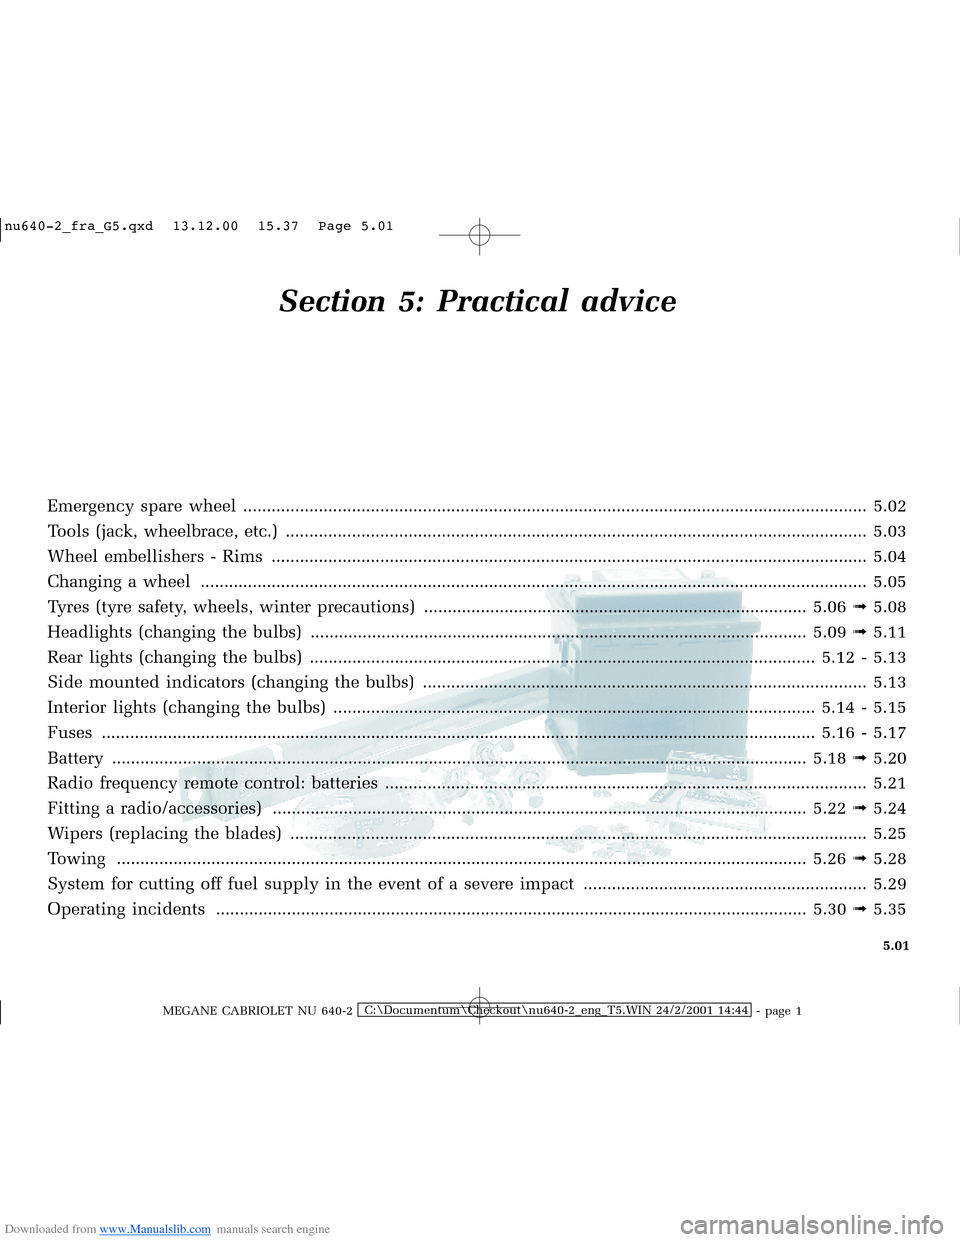 RENAULT MEGANE 2000 X64 / 1.G Owners Manual Downloaded from www.Manualslib.com manuals search engine �Q�X������B�I�U�D�B�*���T�[�G� � ��������� � ������ � �3�D�J�H� ����
MEGANE CABRIOLET NU 640-2C:\Documentum\Chec